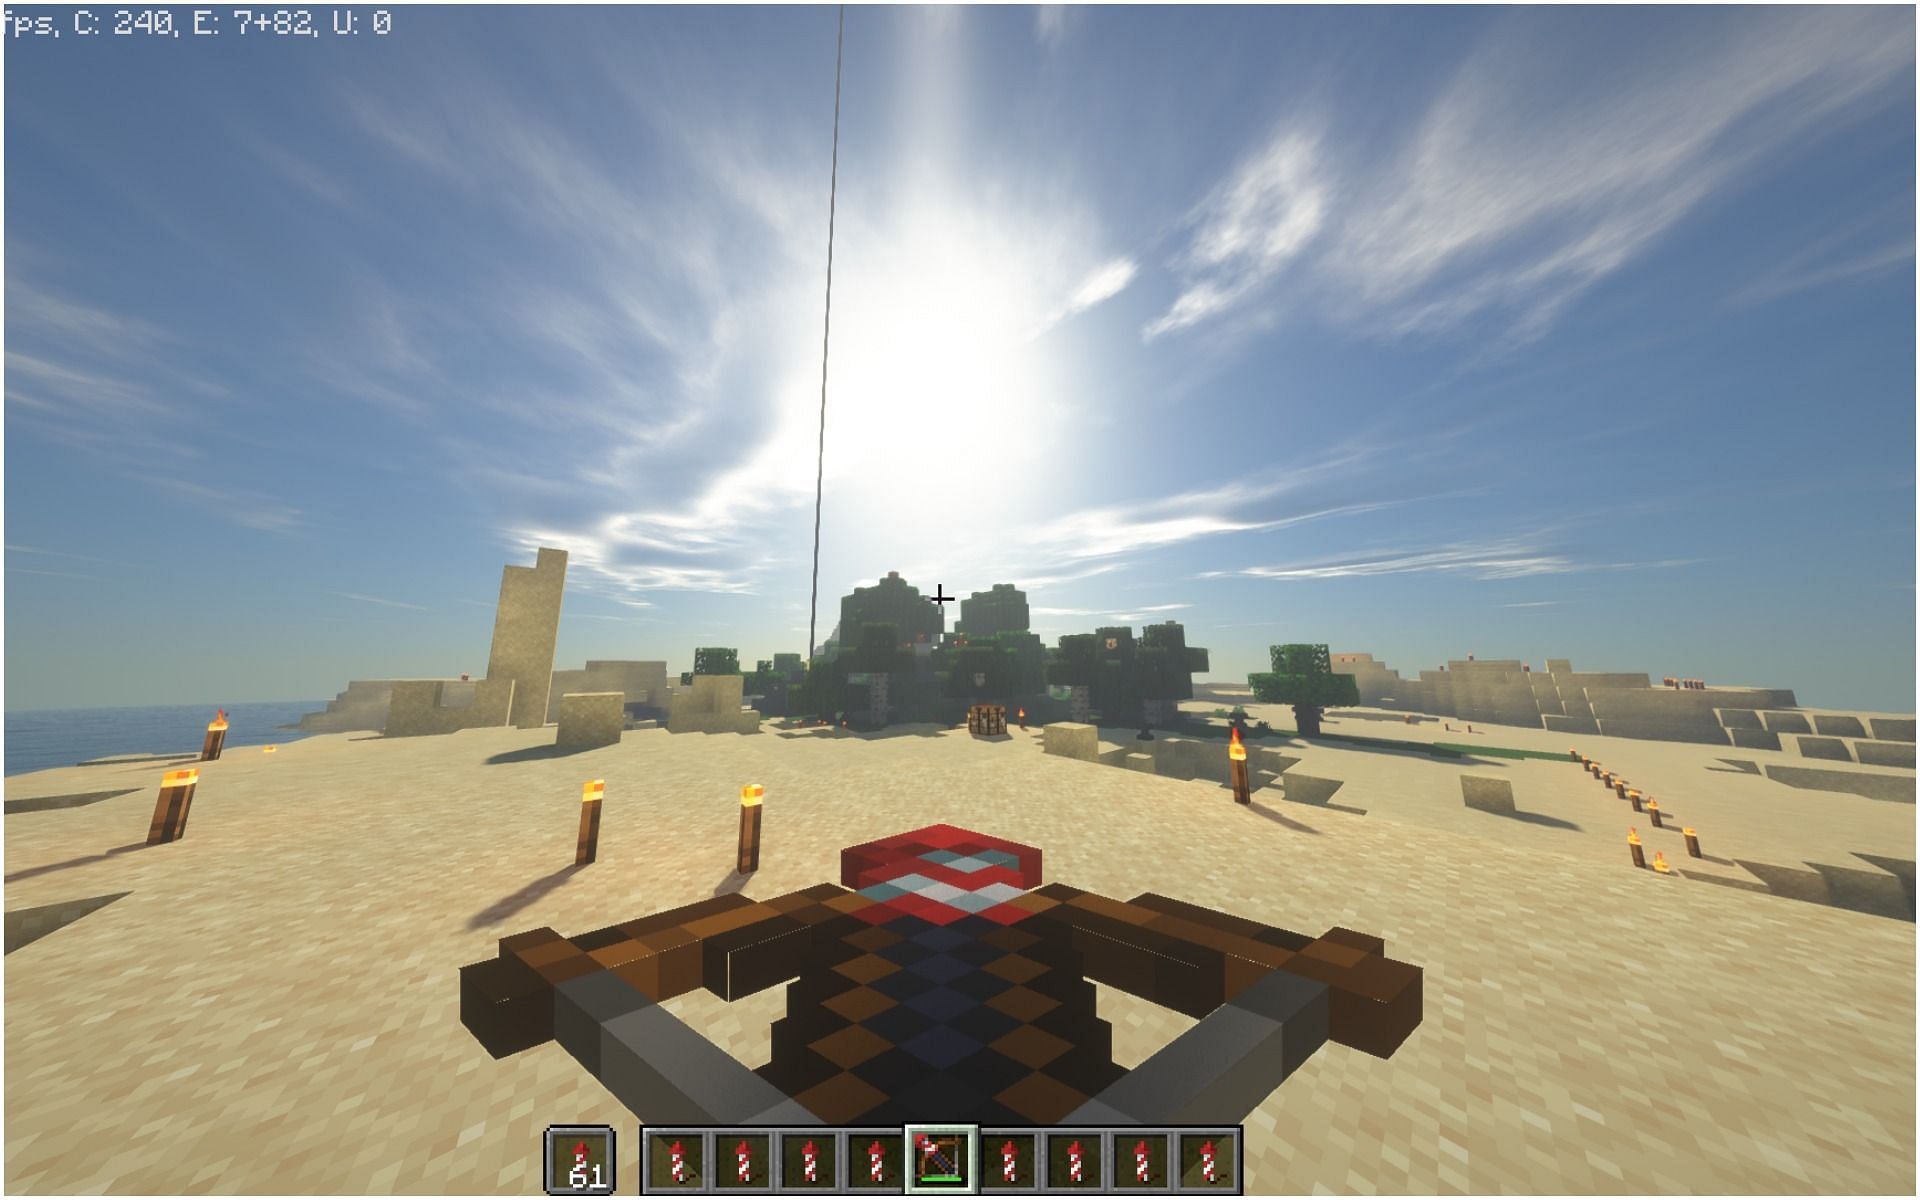 how to make a rocket launcher in minecraft crossbow